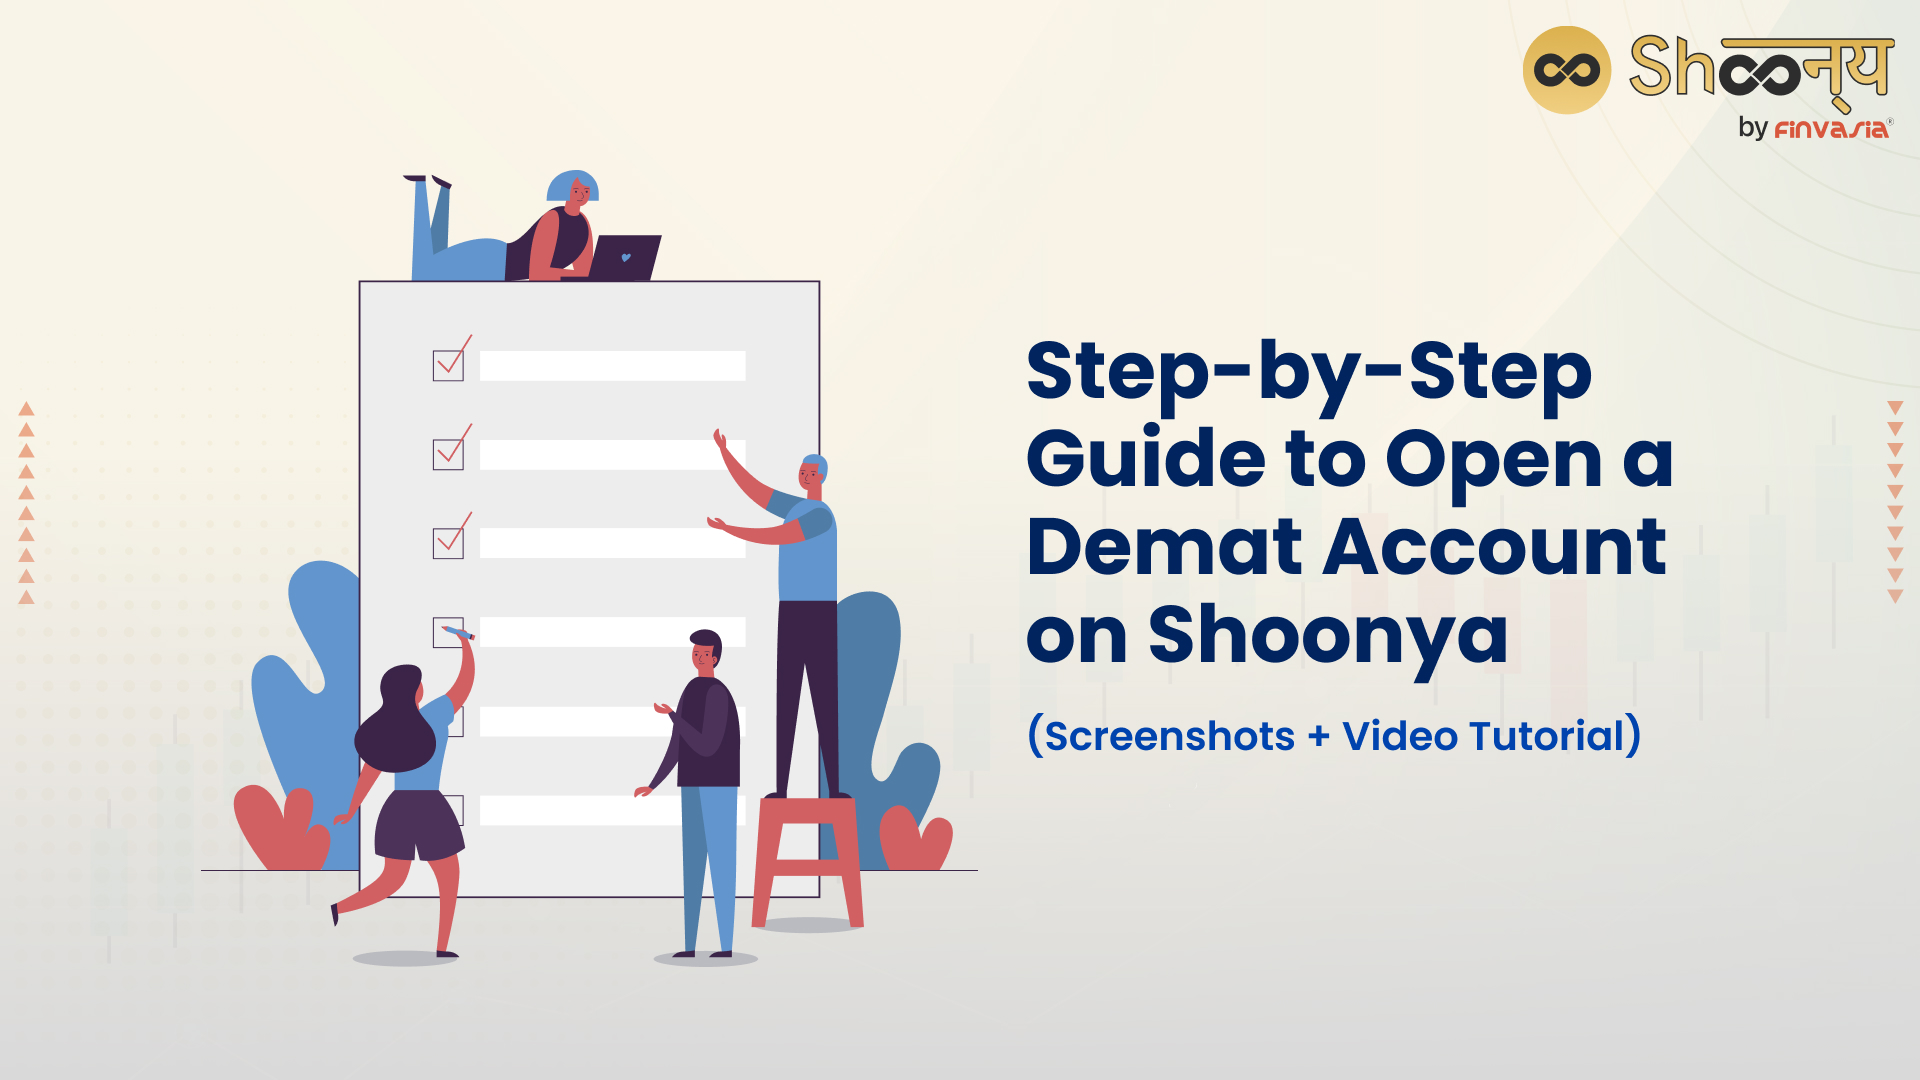 How to Open a Demat Account in India - A Step-by-Step Guide